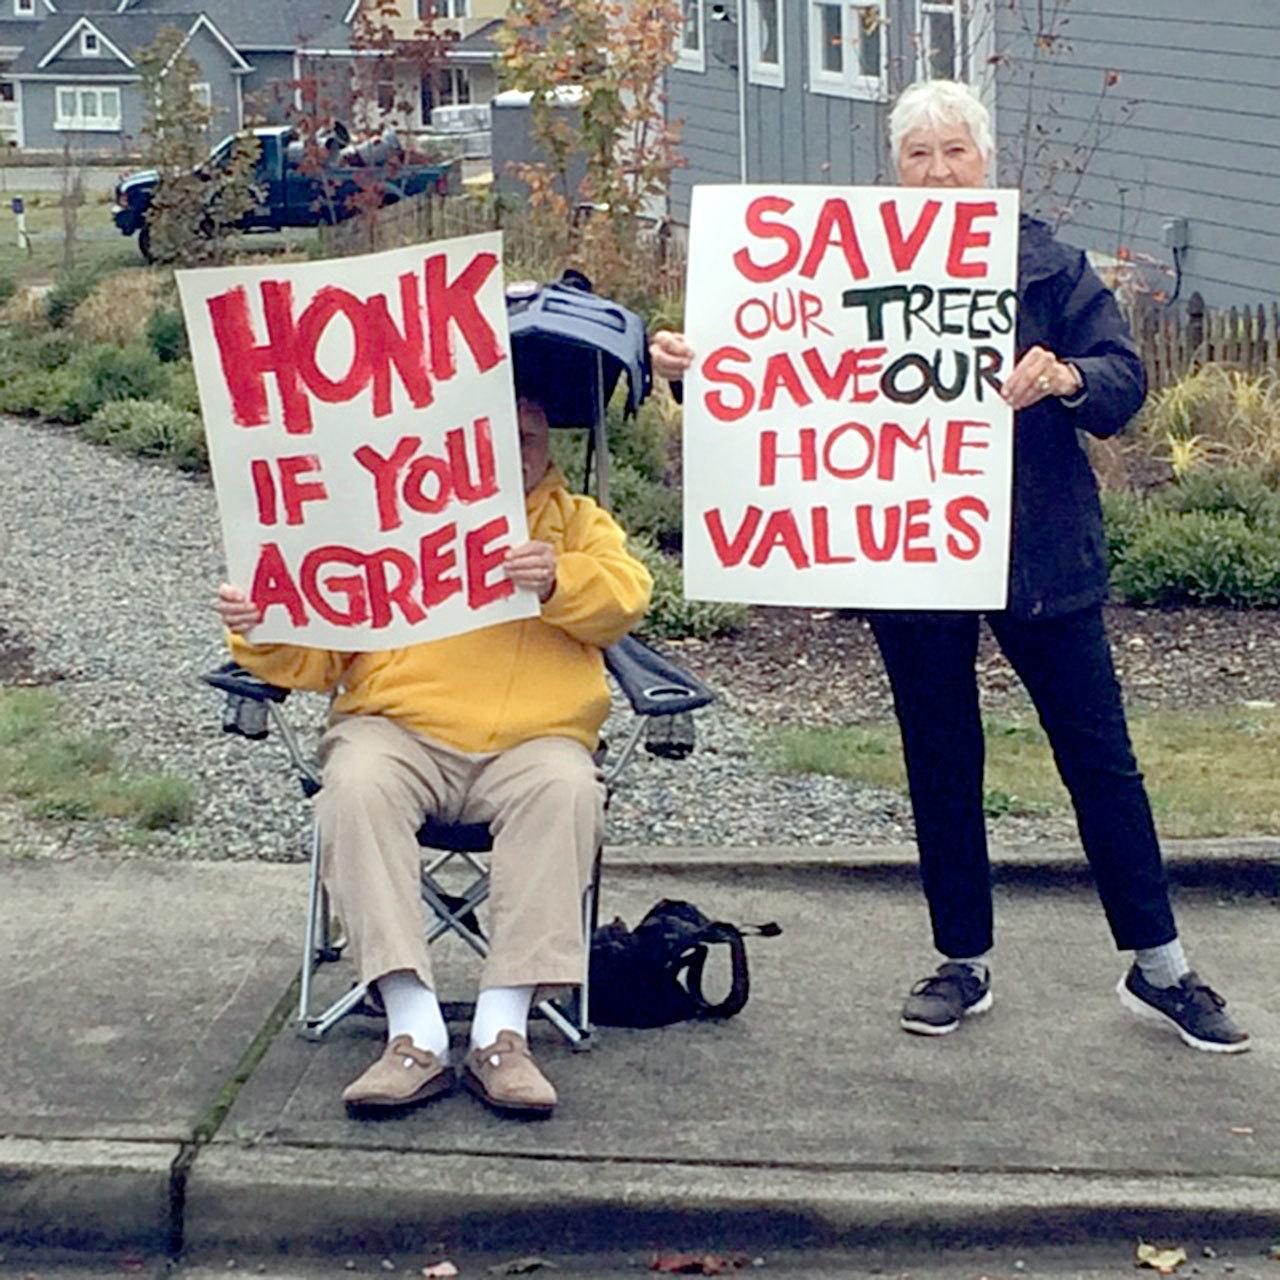 Roughly 40 Port Ludlow residents picketed outside the Cove Cottages in Port Ludlow last Sunday to protest timber harvesting by Port Ludlow Associates in 2015. (Eric Herzog)